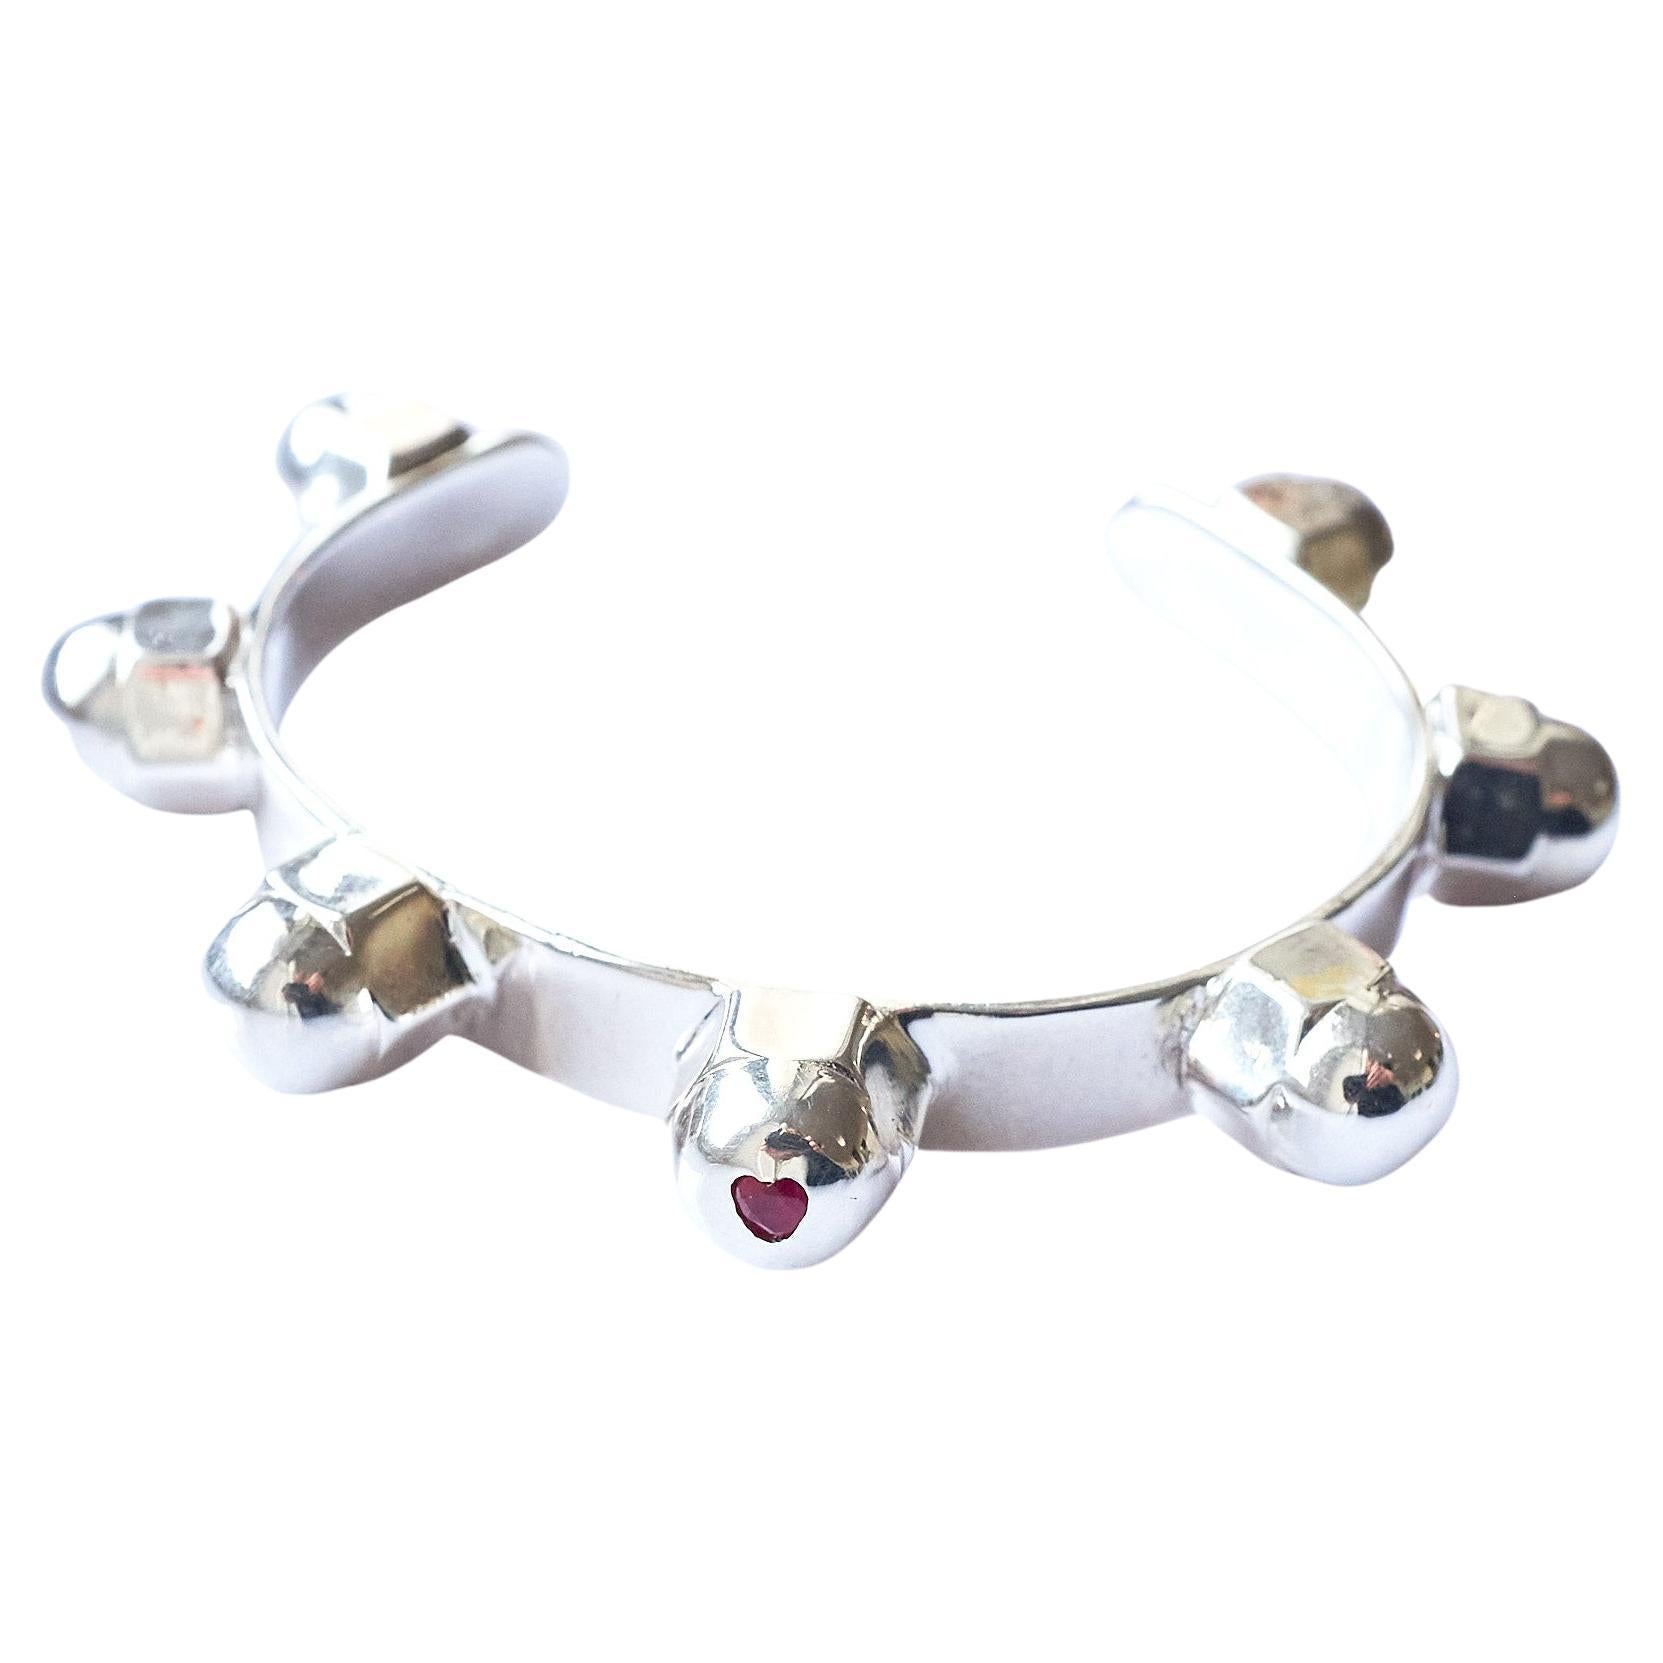 Heart Ruby Cuff Bangle Bracelet with Studs in Sterling Silver 
Designer: J Dauphin

Gem: Heart Ruby
Material: Solid Sterling Silver
Brand:  J Dauphin

Hand Made in Los Angeles

Available for immediate delivery